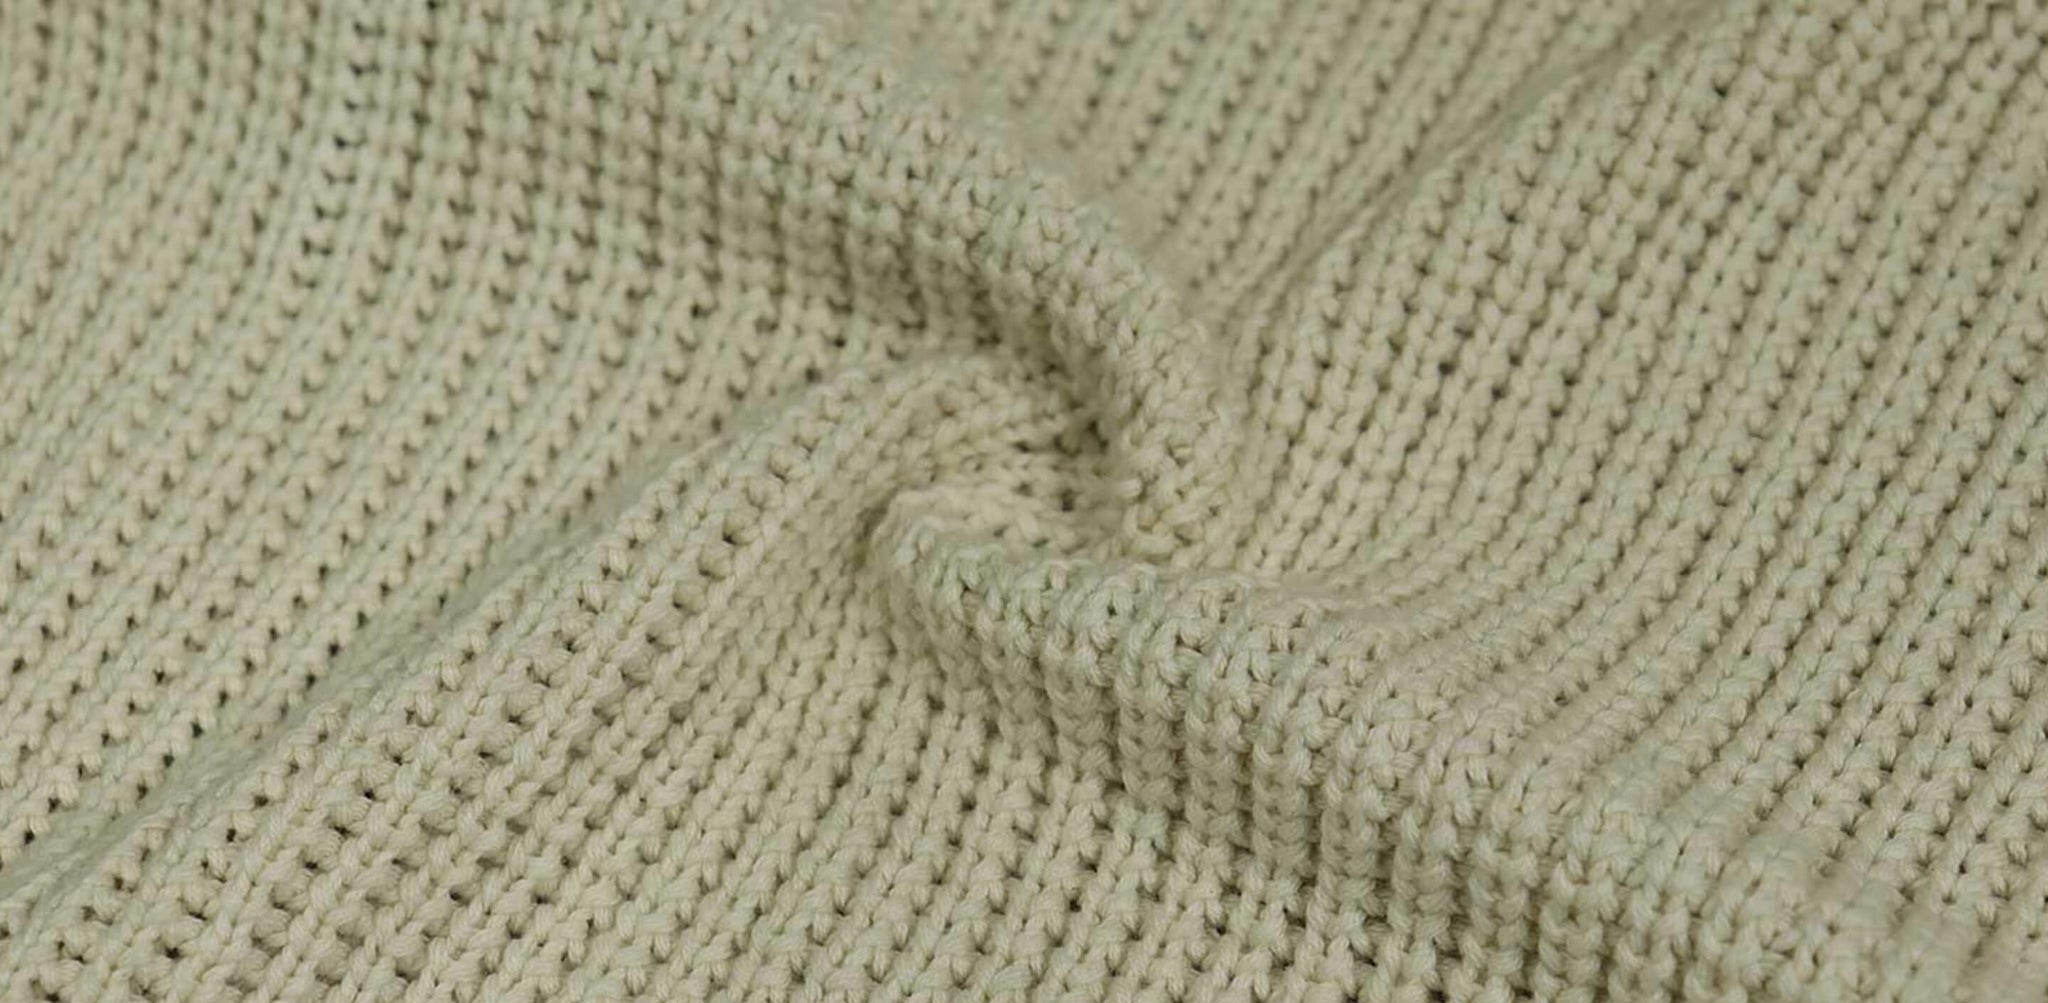 What is a cotton knit fabric? - Quora